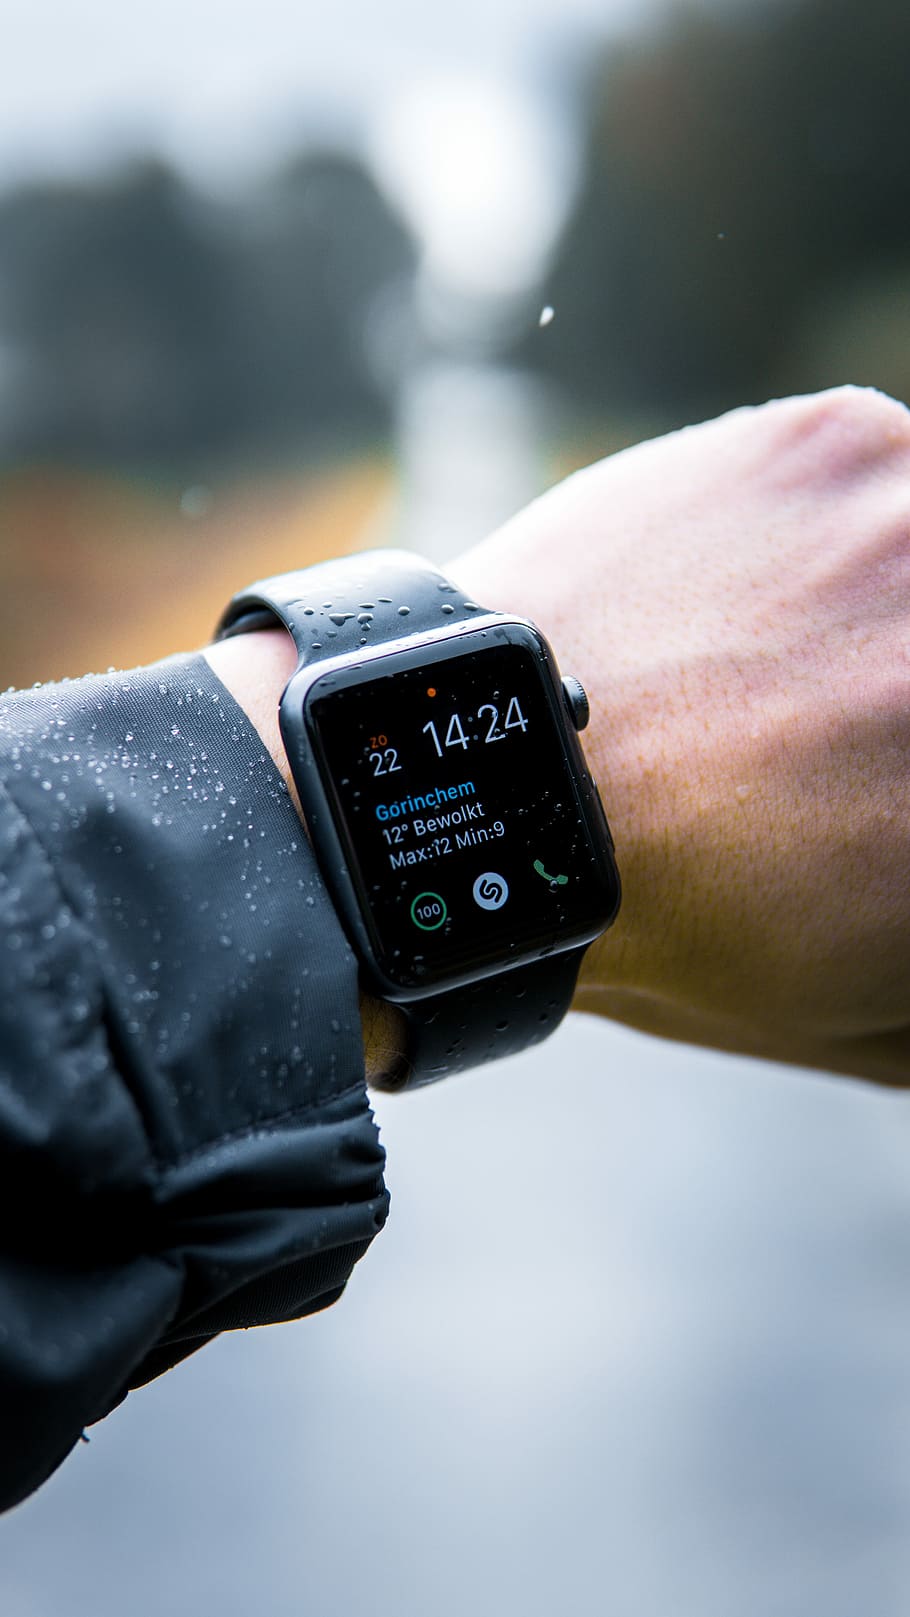 person wearing Apple Watch at 14:24, black Apple Watch with sports band